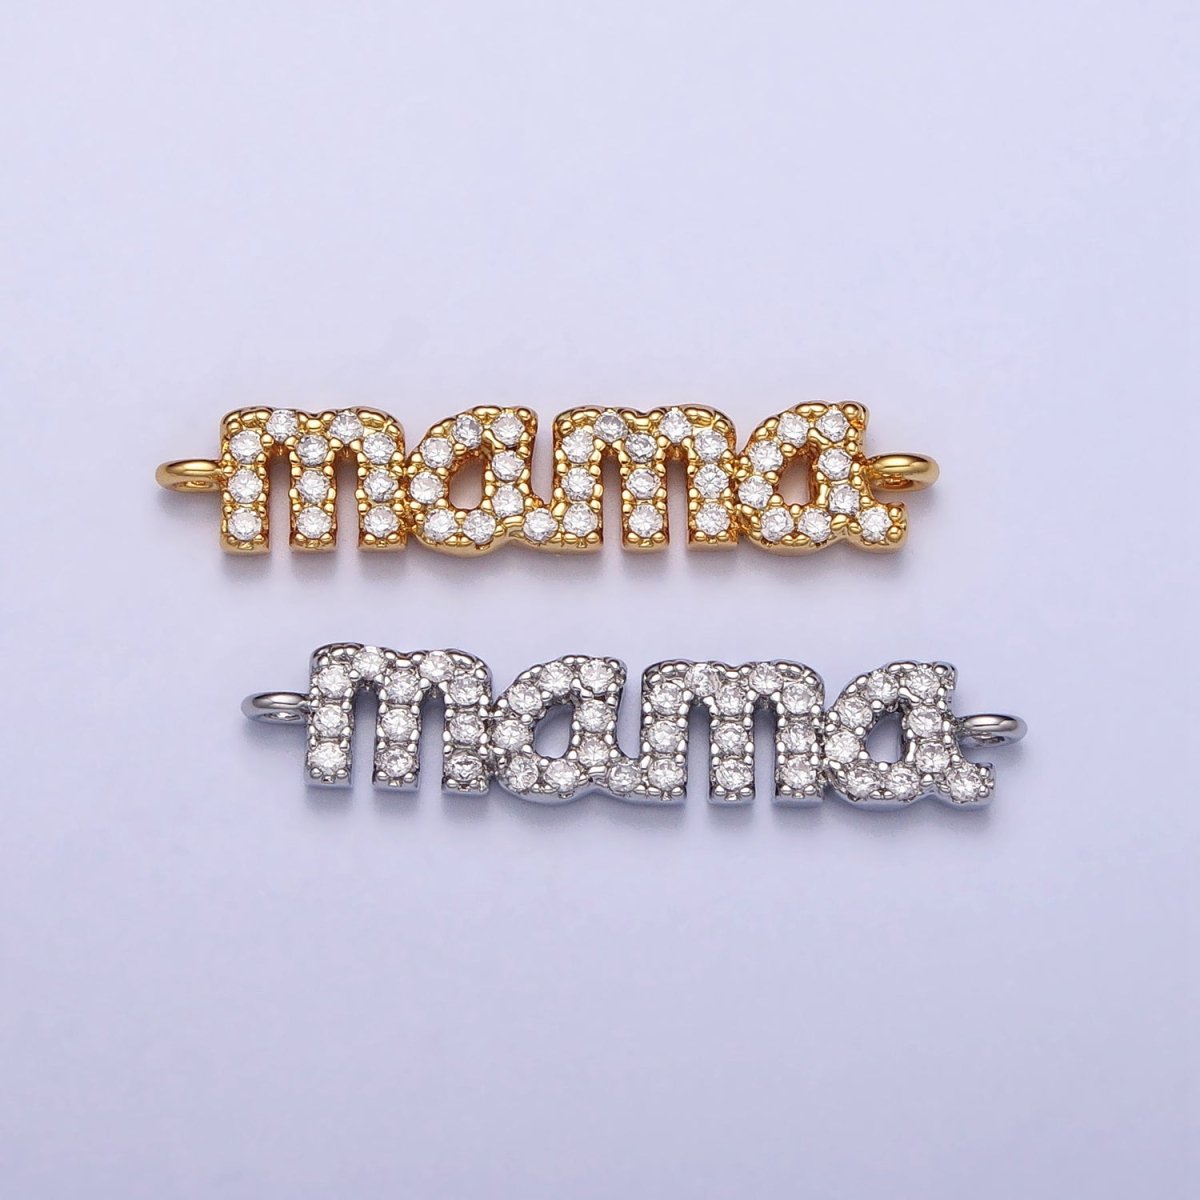 Cubic diamond MAMA connector charm Cubic zirconia Mother Link Connector for Bracelet Necklace Jewelry making supplies AA-978 AA-979 - DLUXCA